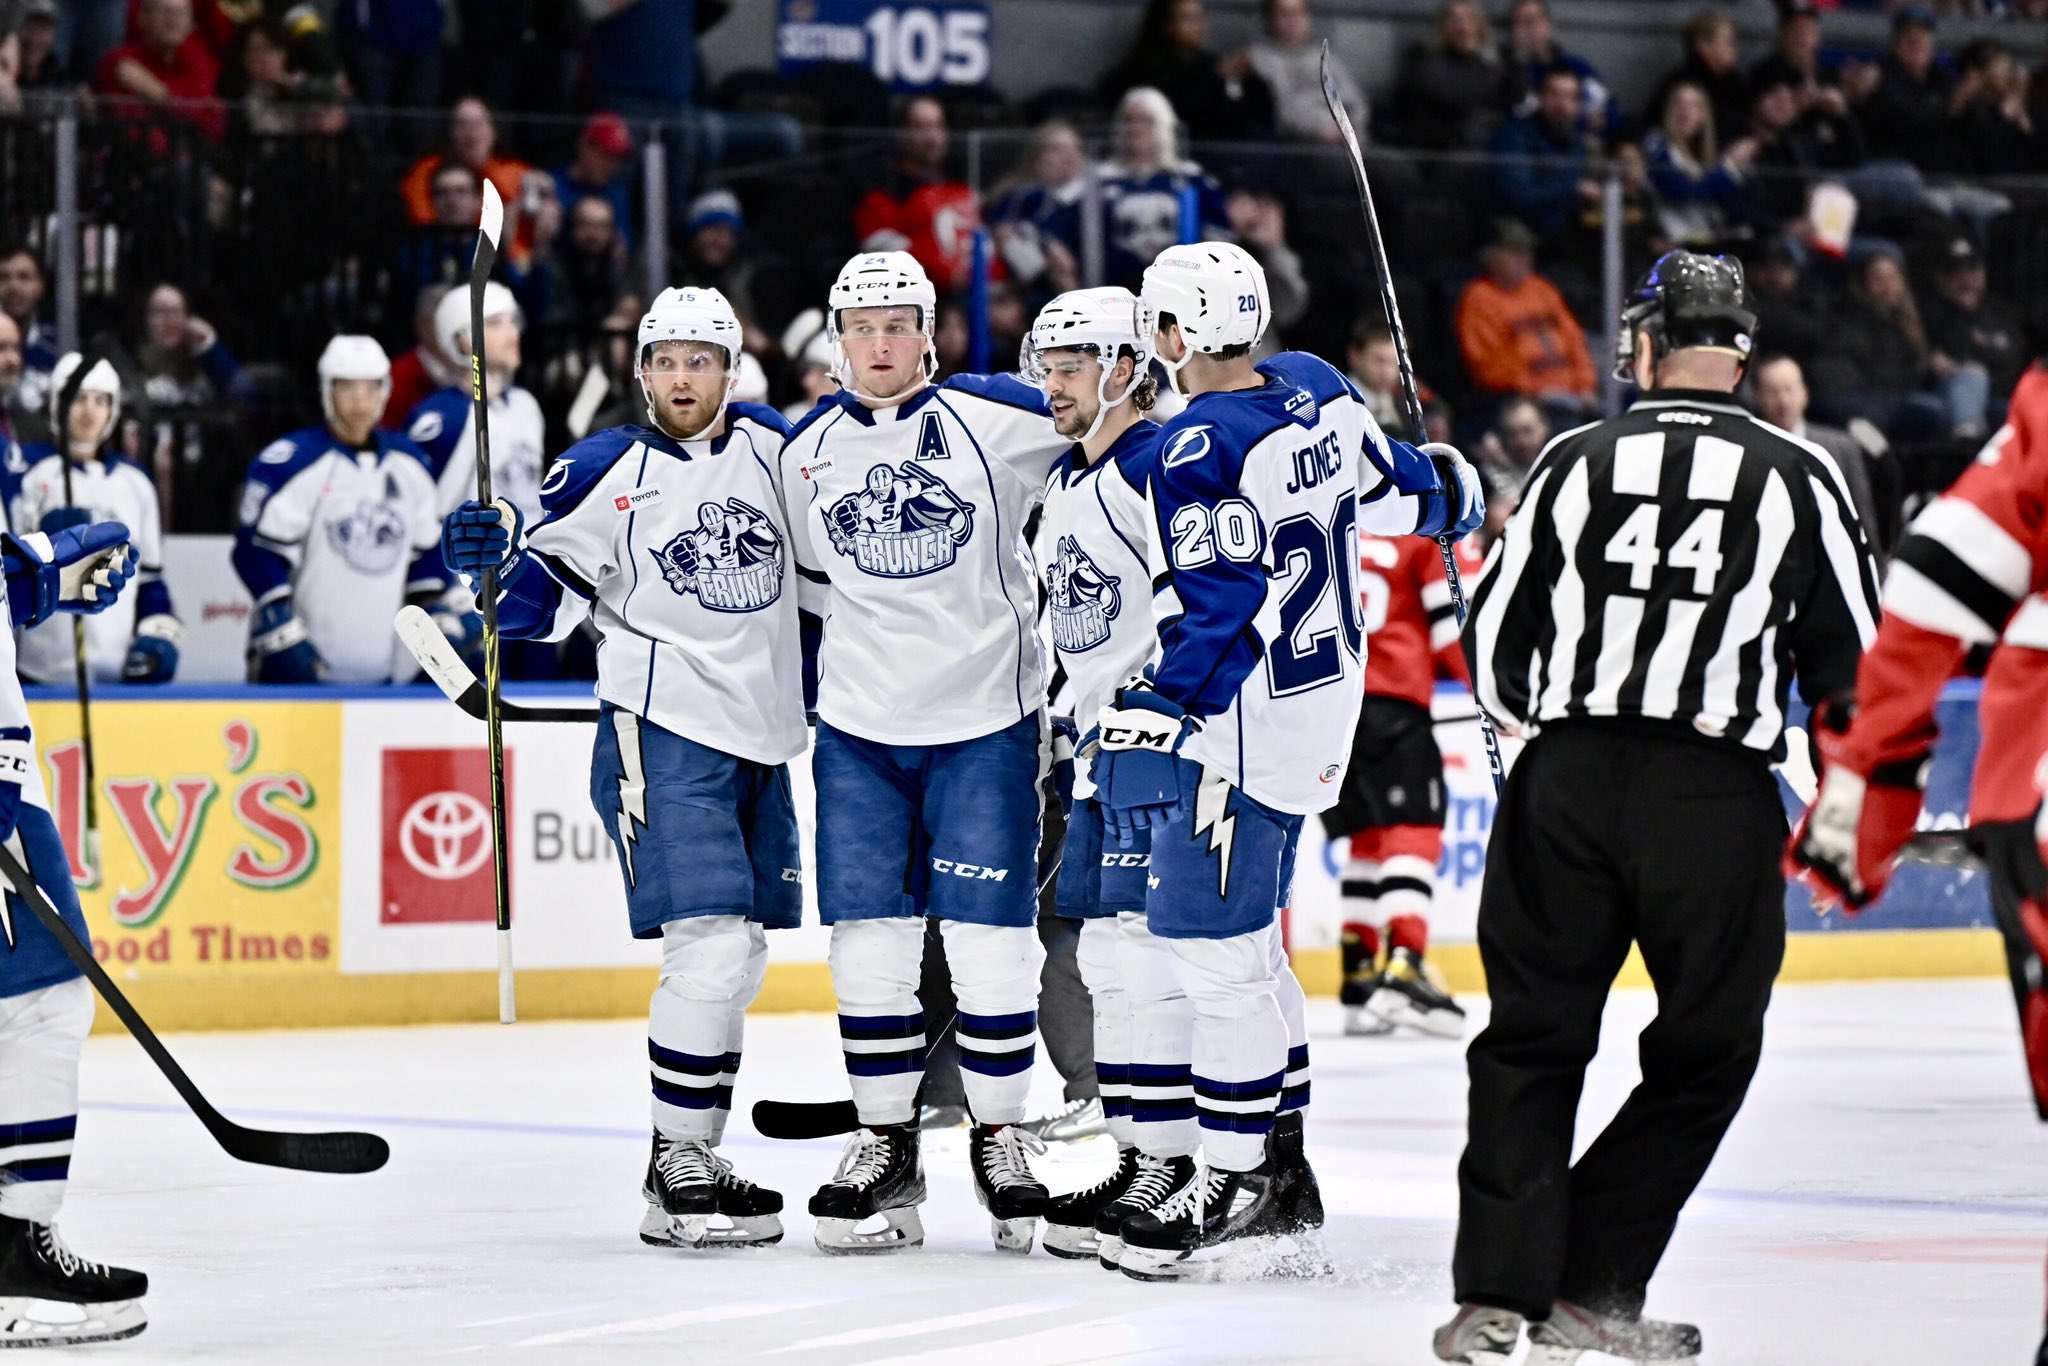 Crunch bounce back with win over Comets